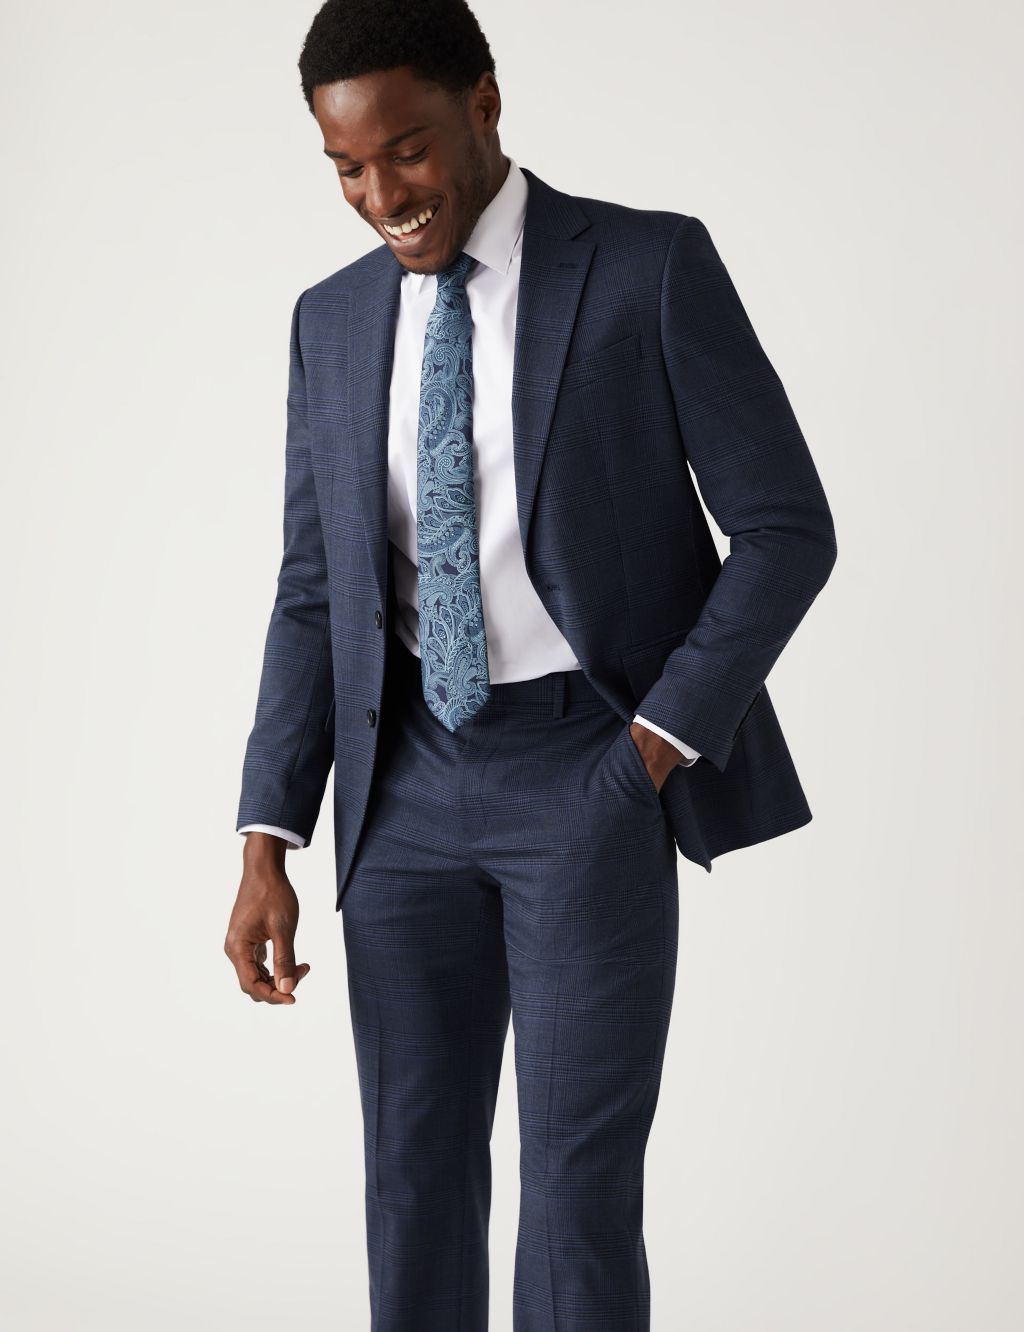 Regular Fit Prince of Wales Check Suit image 2